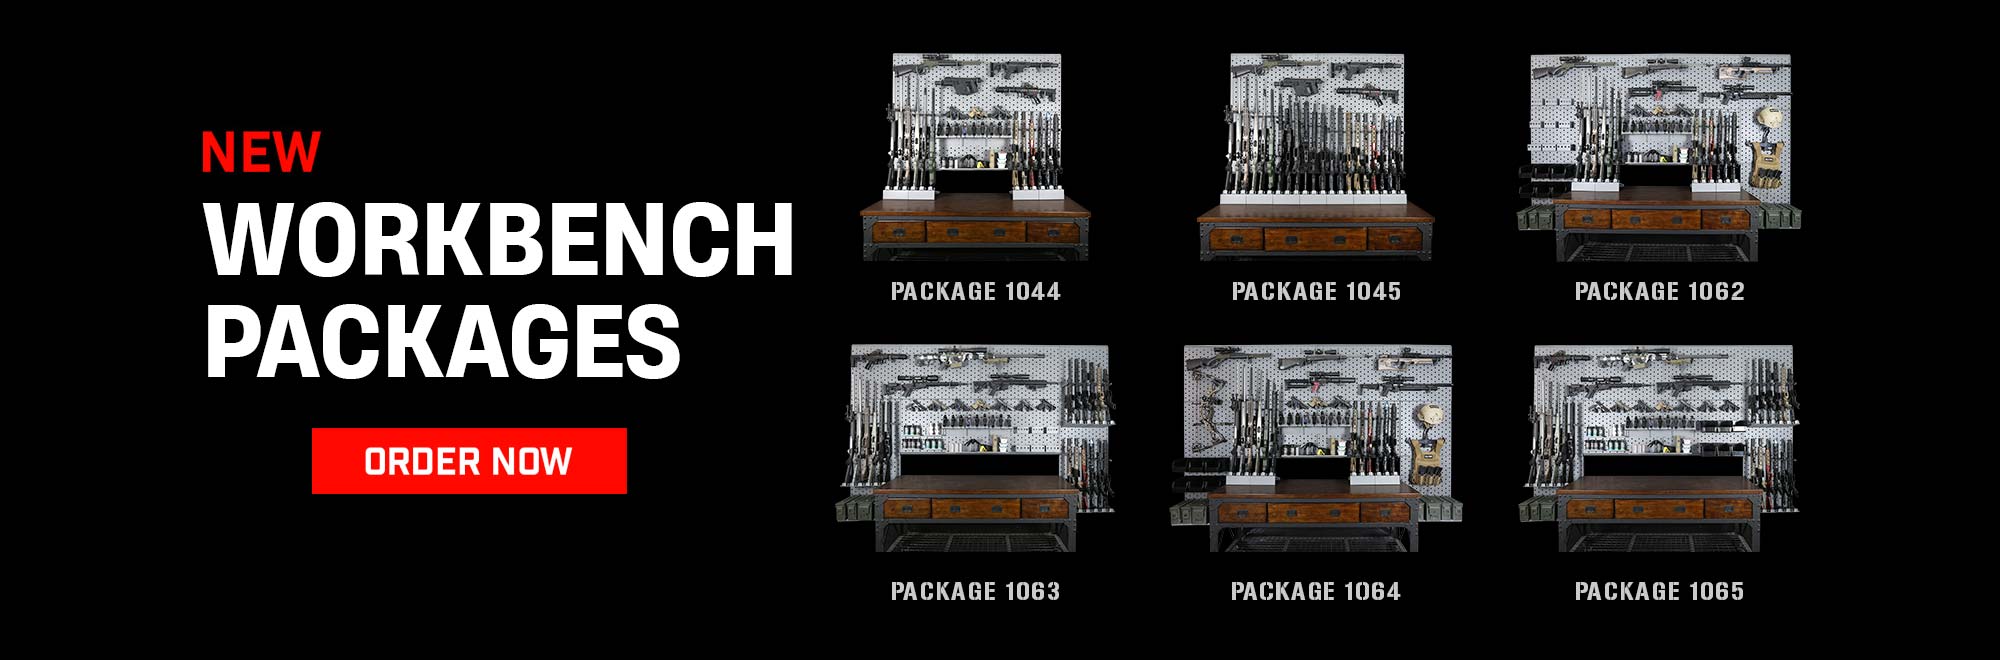 Slide showcasing our New Workbench Packages